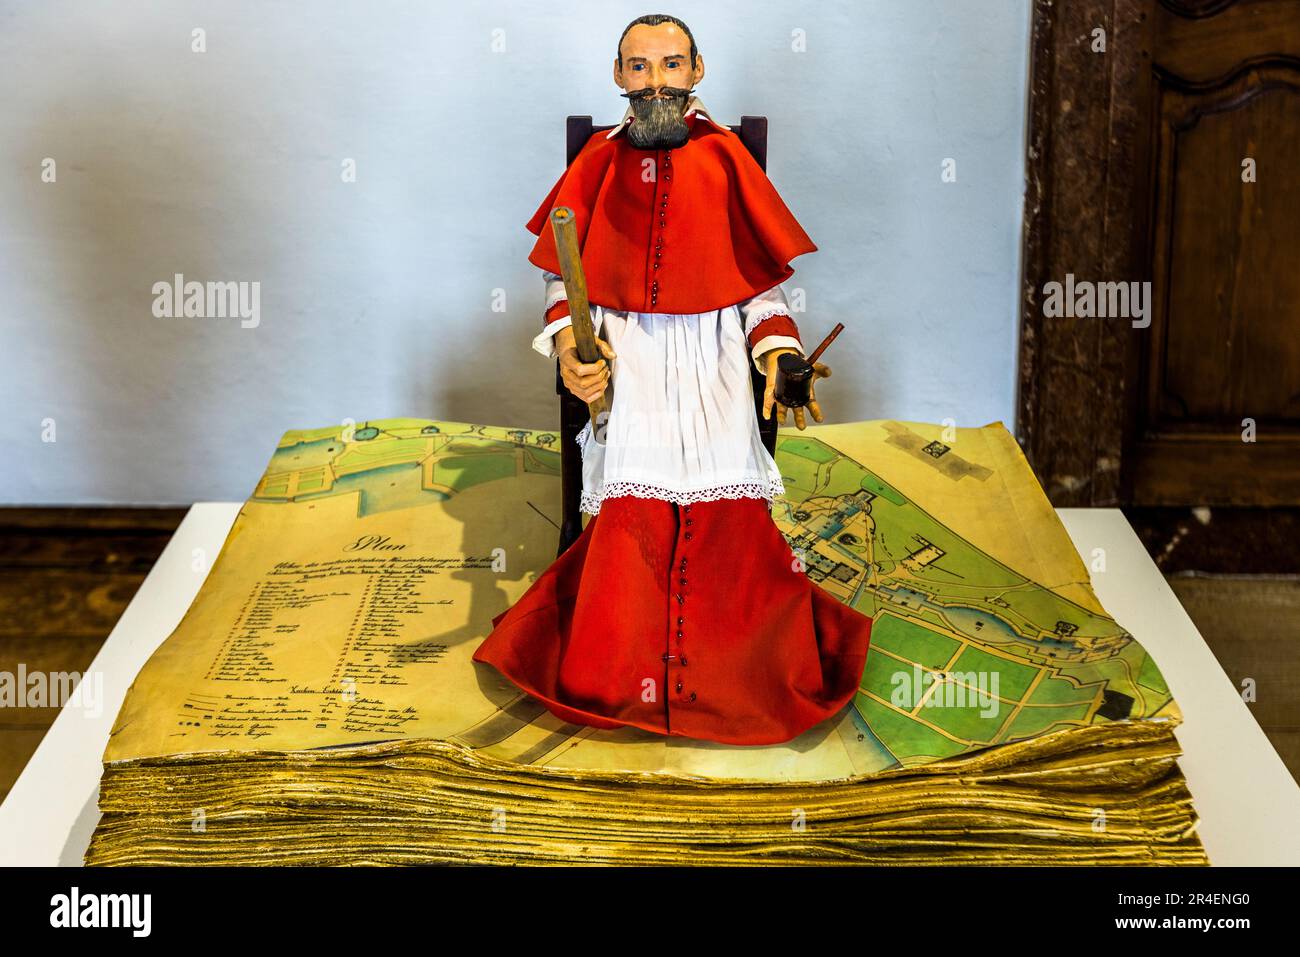 Figure of Prince and Archbishop Markus Sitticus on the plans of his pleasure palace in the museum of Hellbrunn Palace in Salzburg, Austria Stock Photo